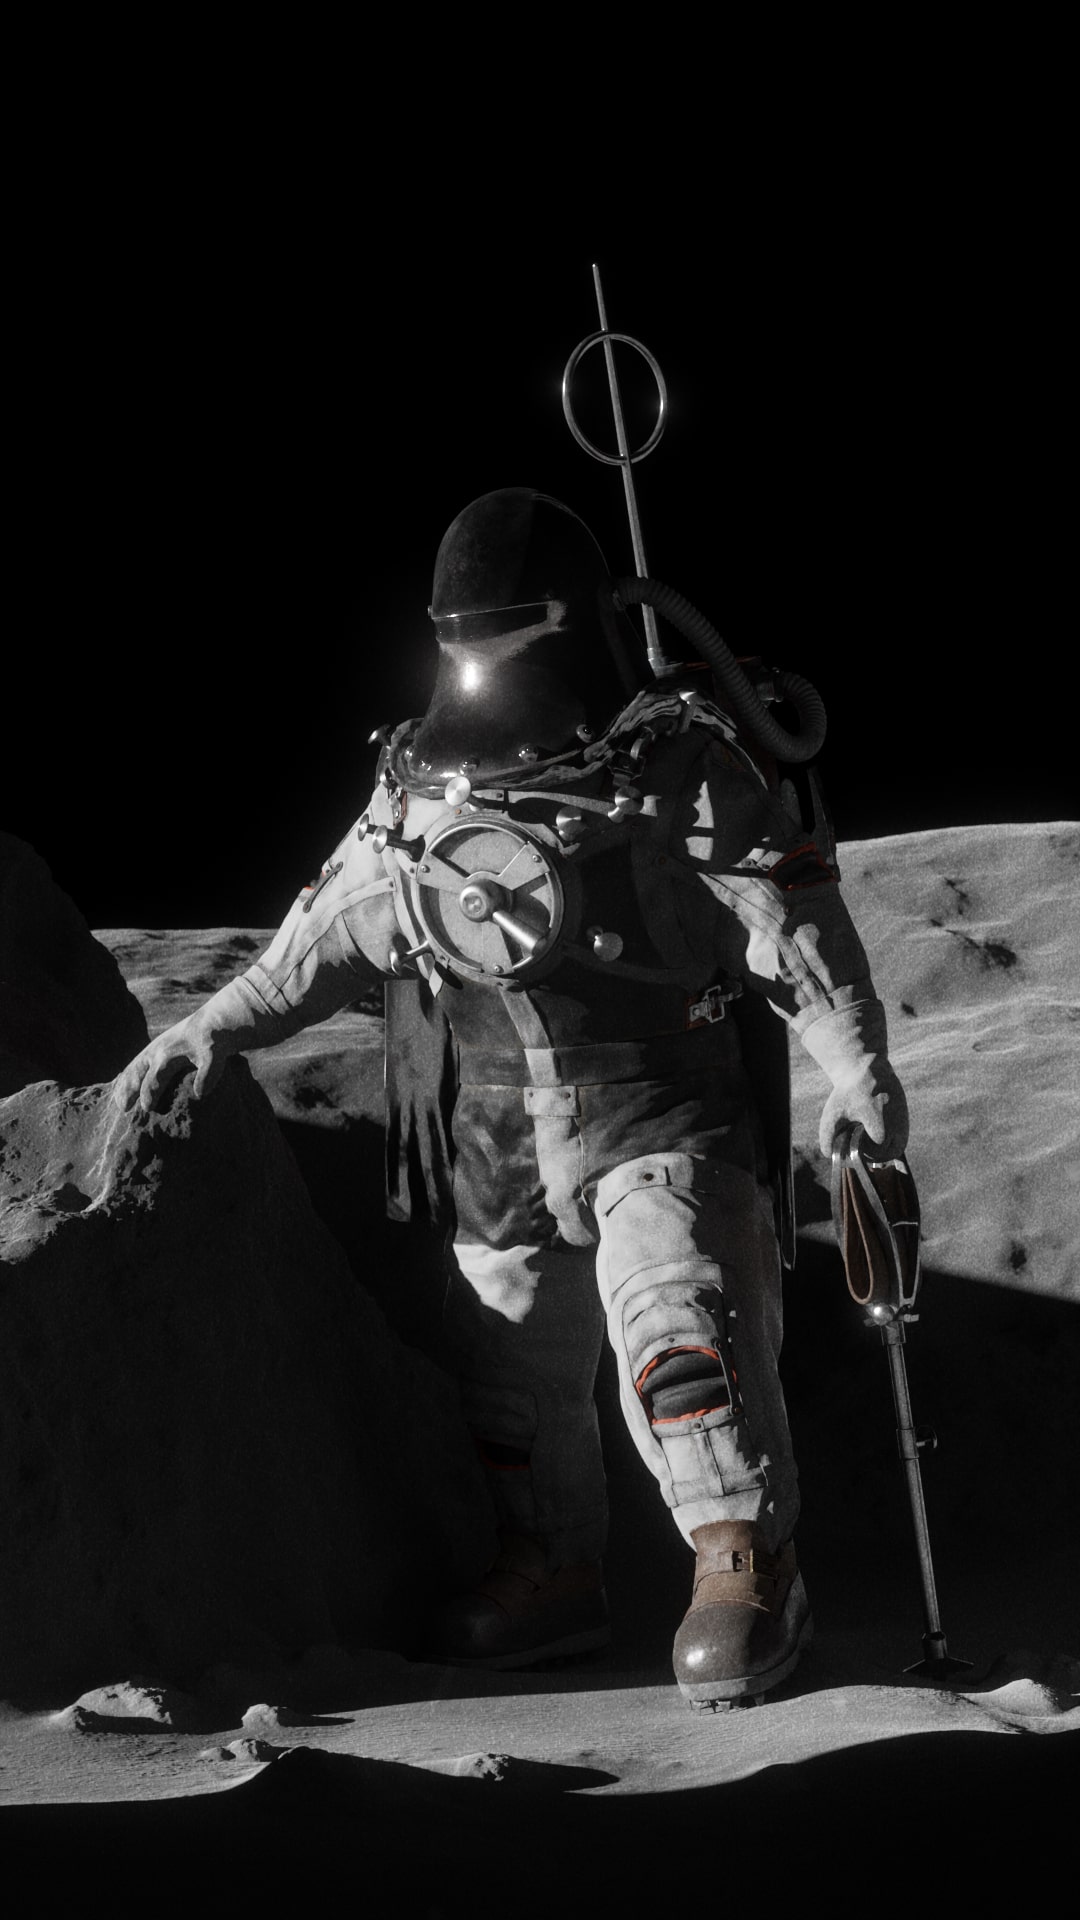 CGI astronaut walking out of a lunar crater.